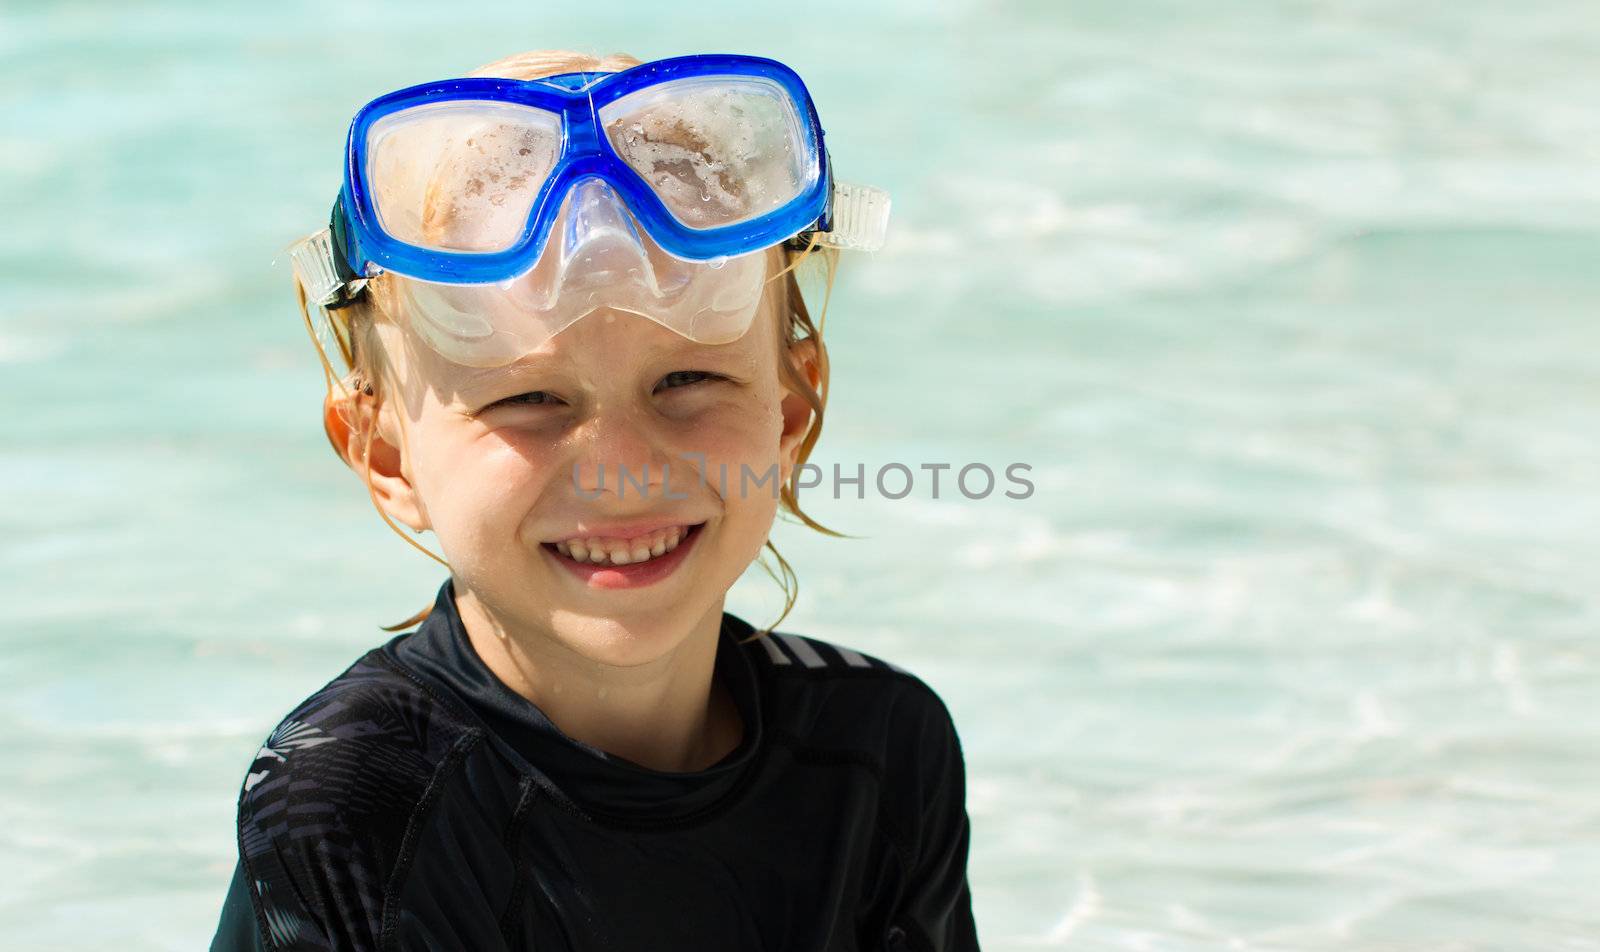 A cute happy young boy in water wearing a dive mask.